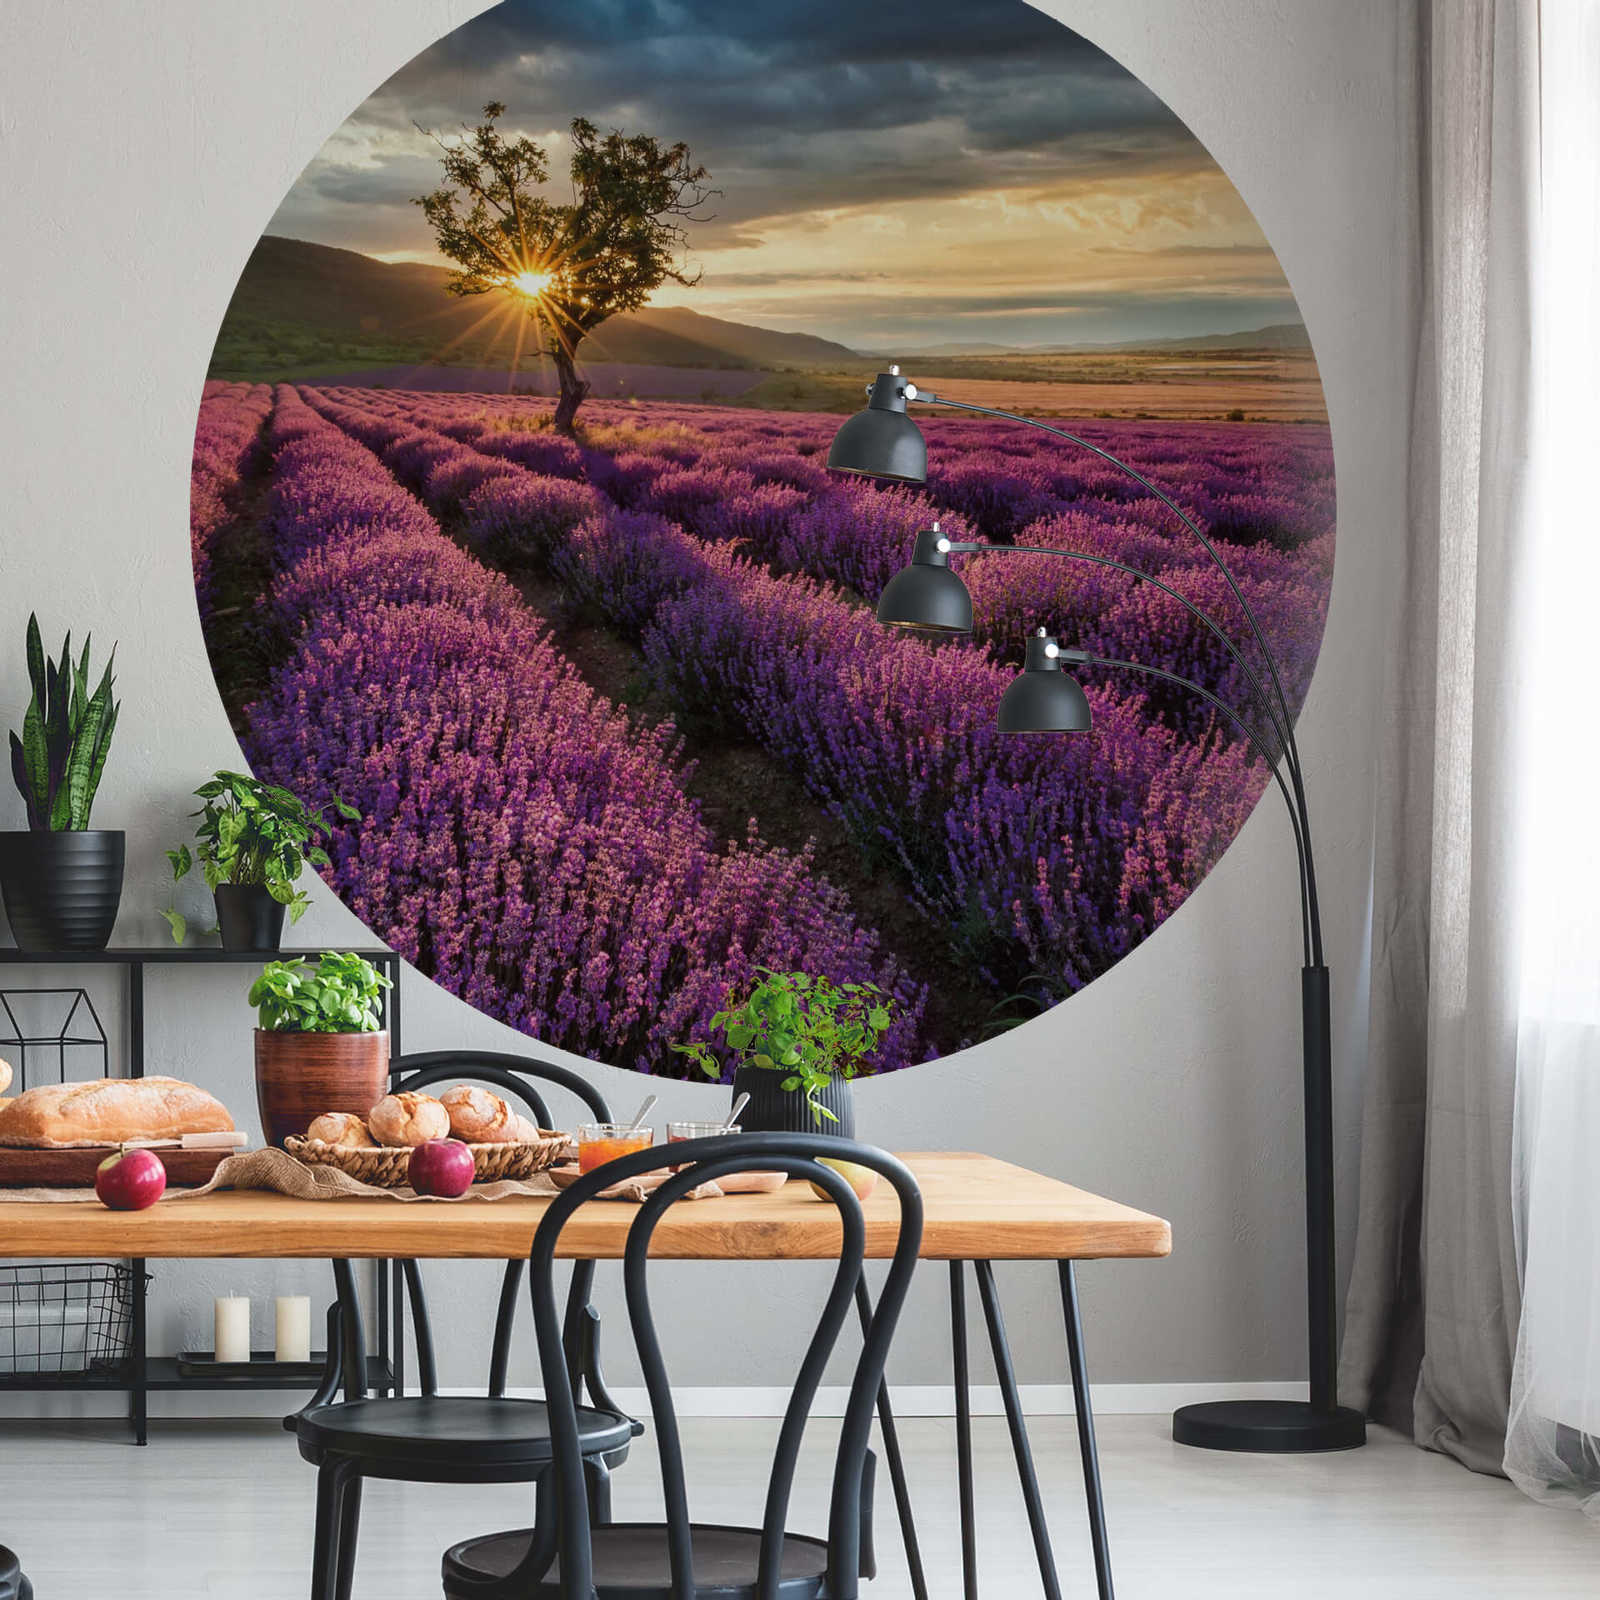             Photo wallpaper round lavender field in Provence
        